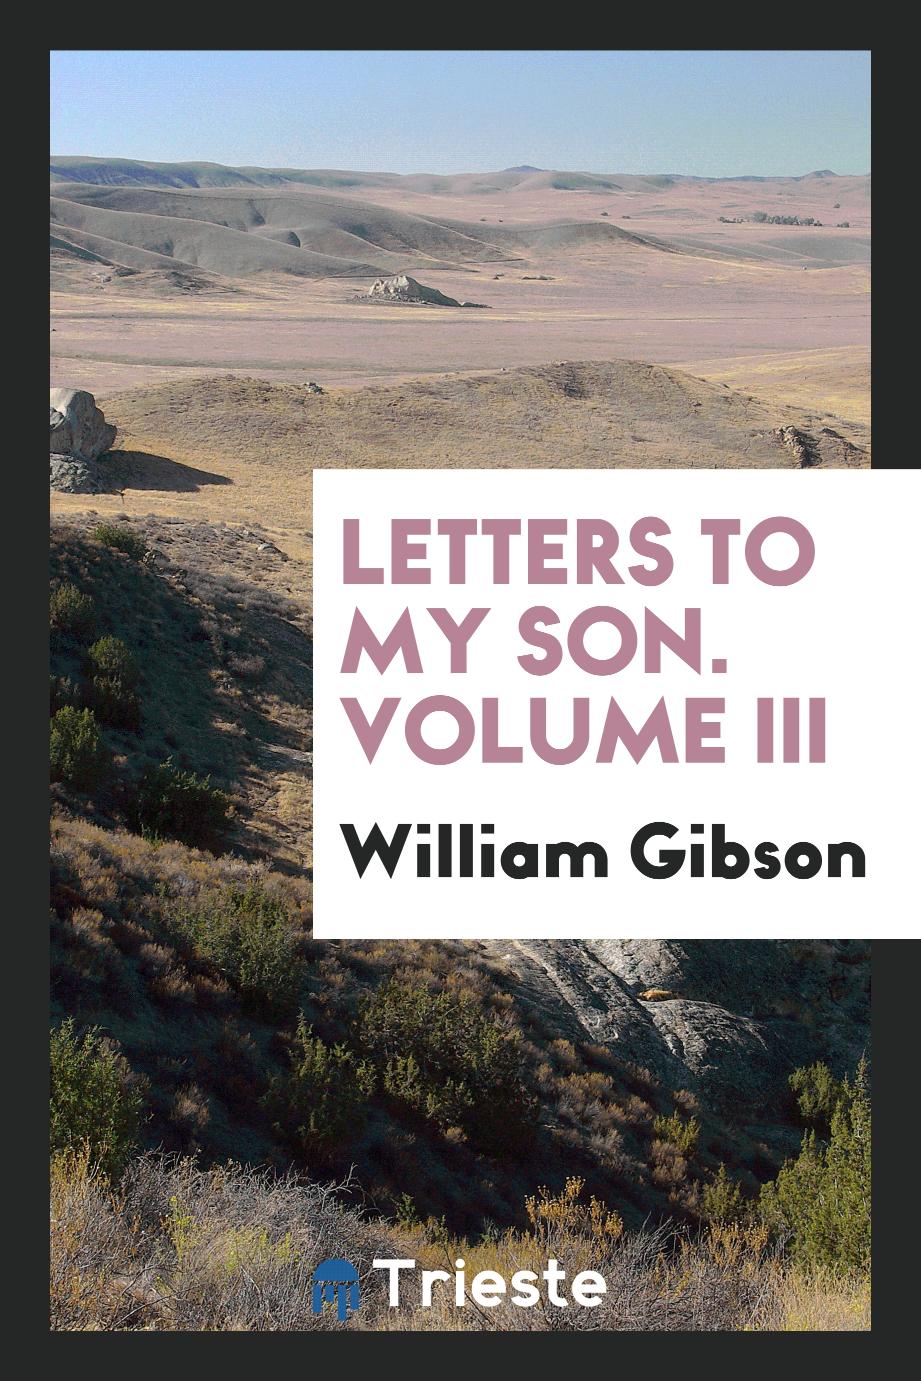 Letters to my son. Volume III